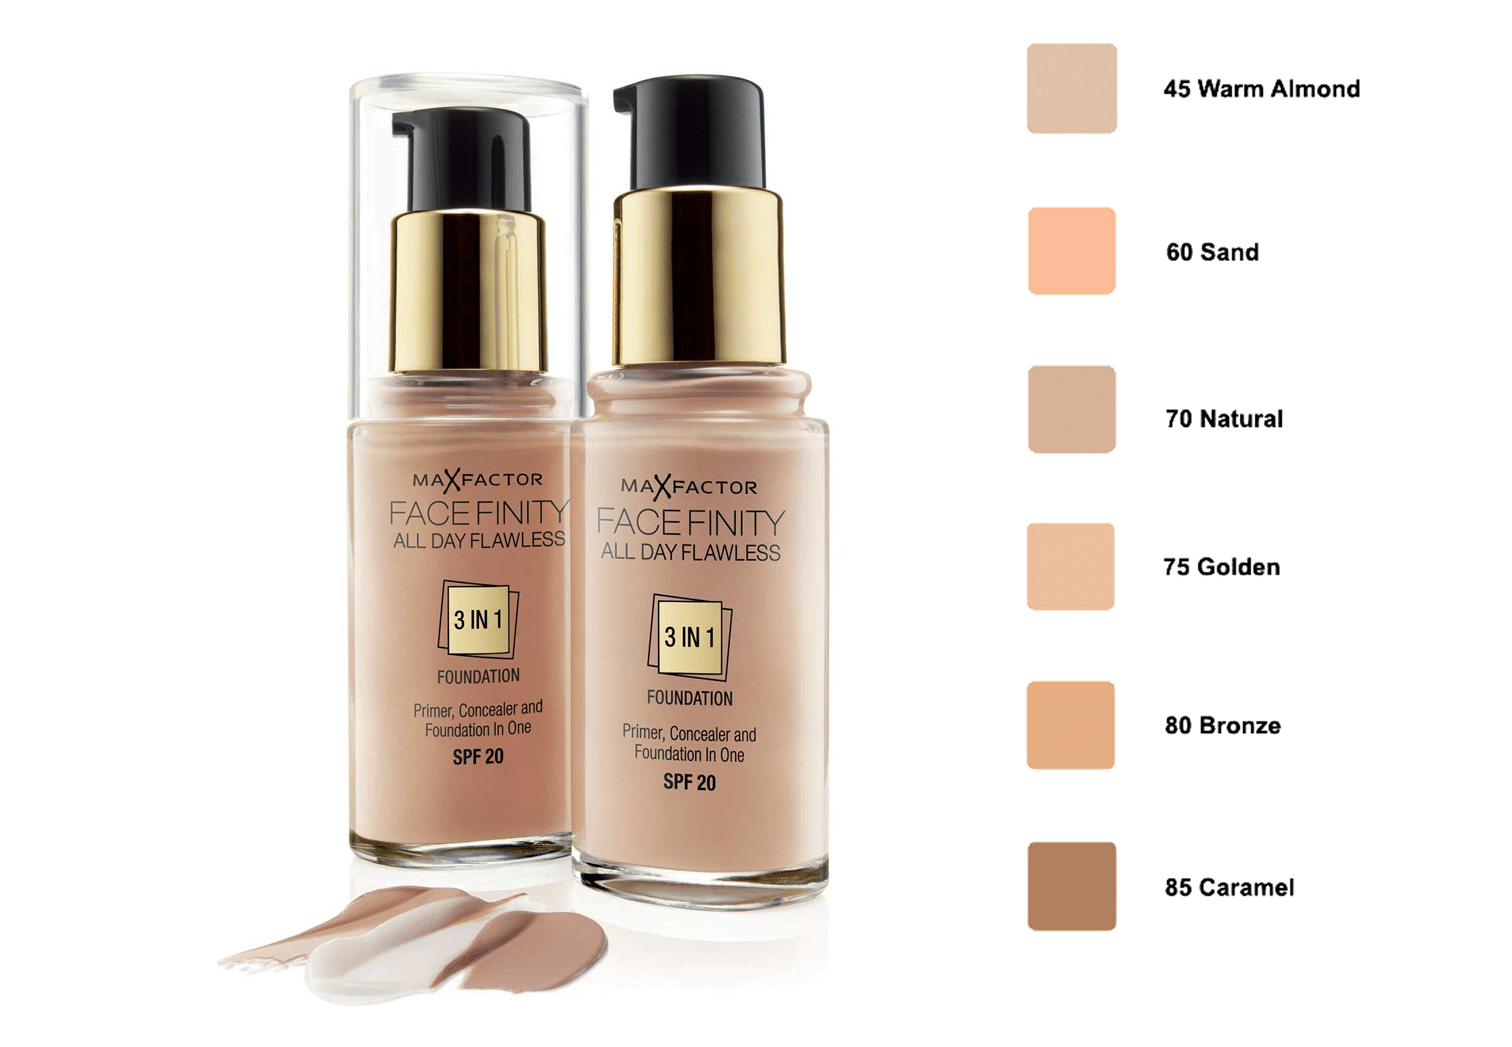 Max Factor Facefinity All Day Flawless 3 IN 1